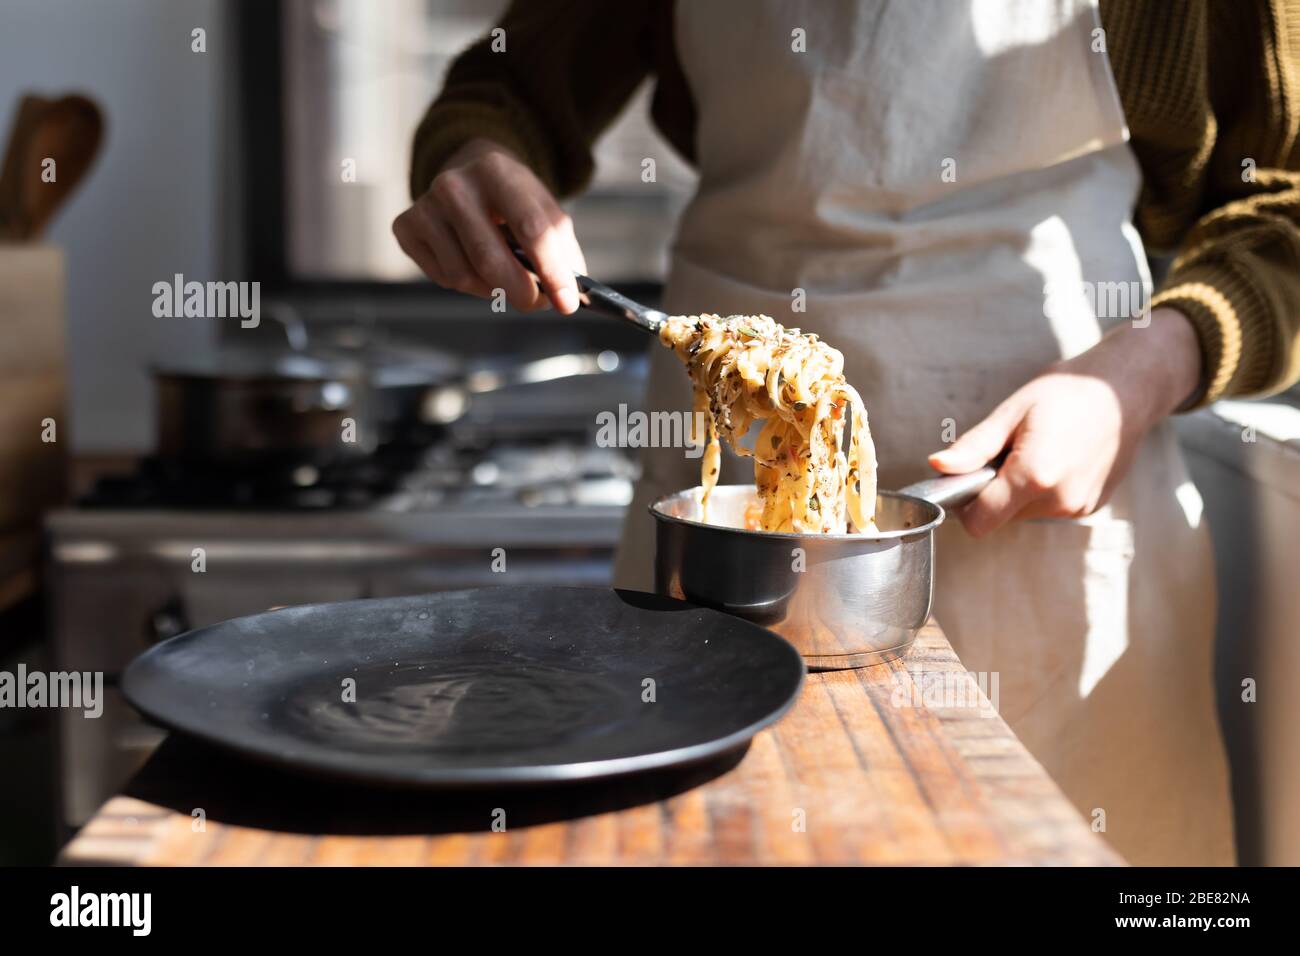 Mid section of Caucasian woman wearing an apron and presenting plate of pasta Stock Photo